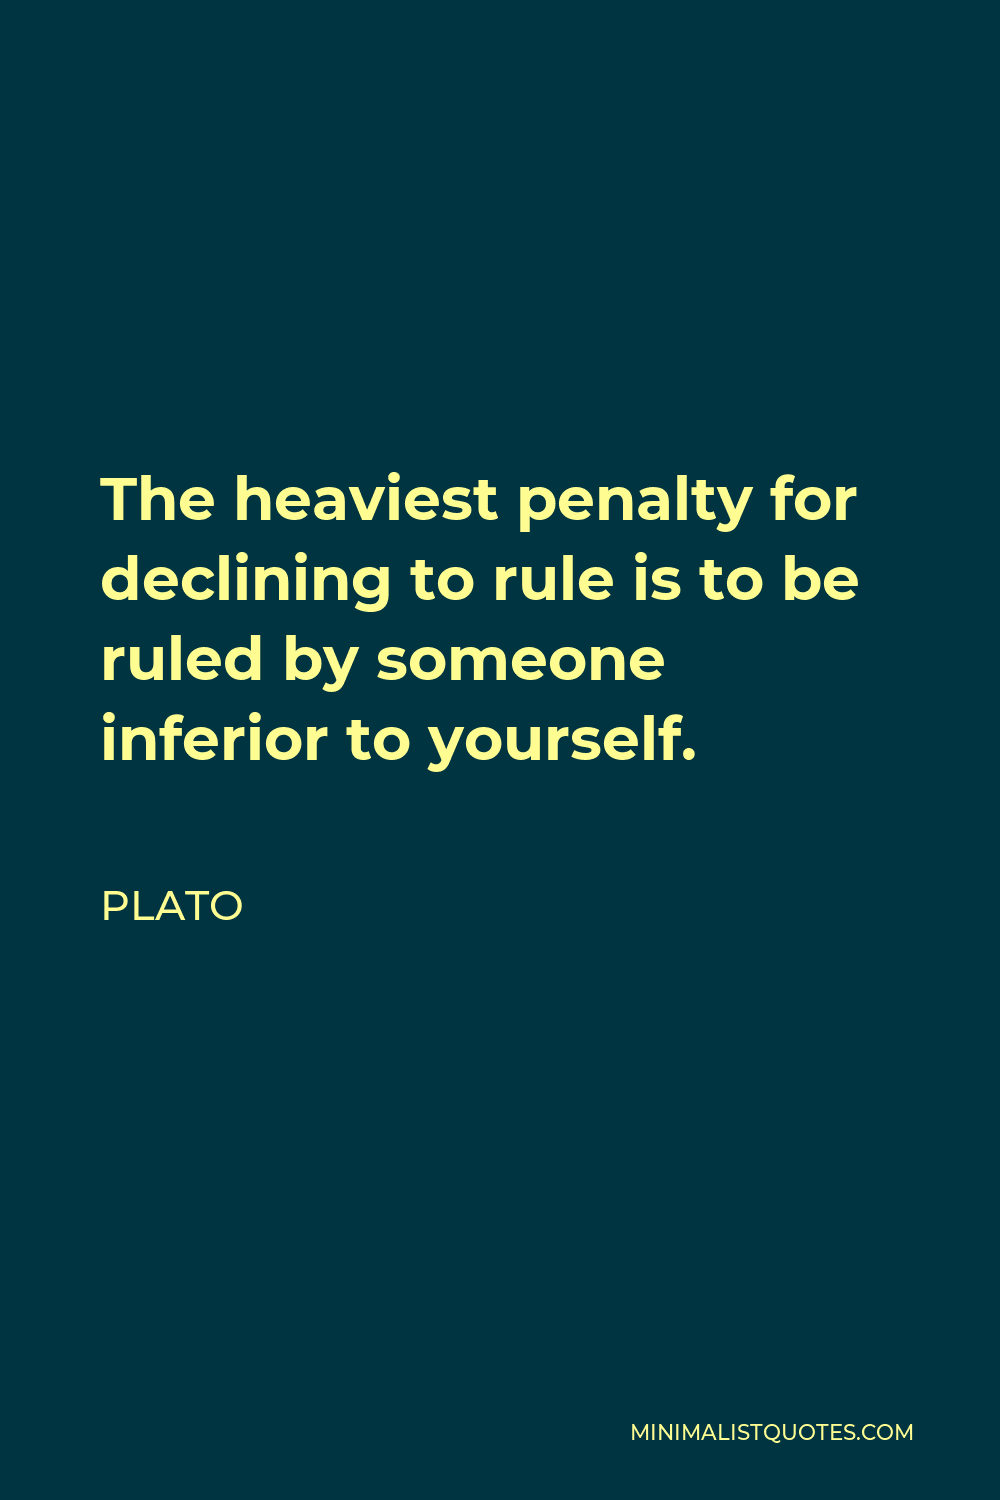 Plato Quote - The heaviest penalty for declining to rule is to be ruled by someone inferior to yourself.